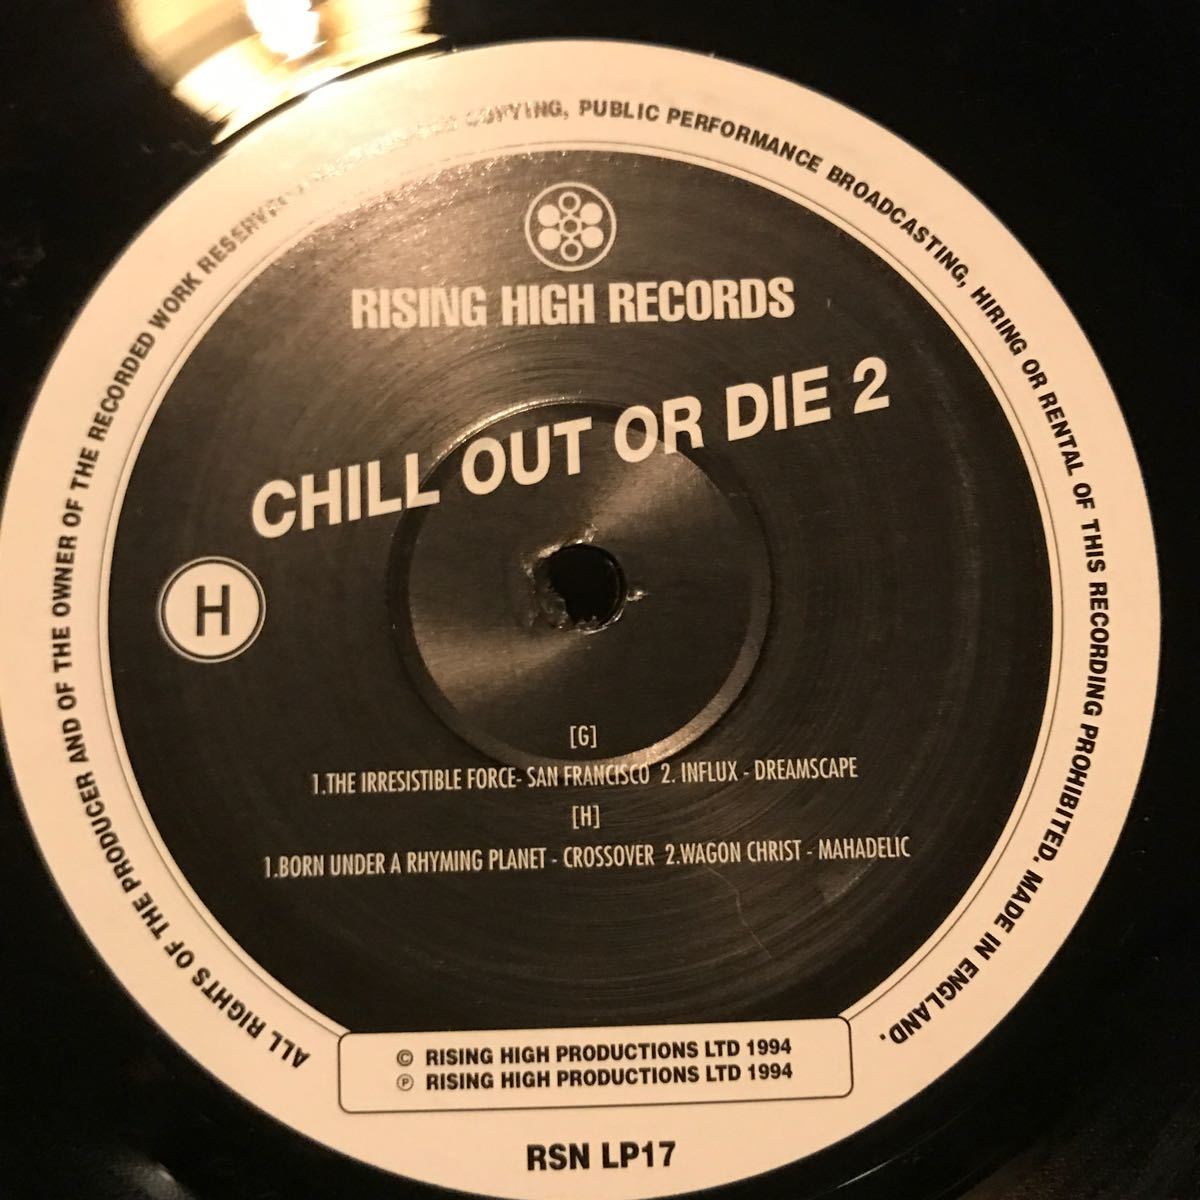 [ Various - Chill Out Or Die II - Rising High Records RSN LP 17 ] Bedouin Ascent , The Irresistible Force , Wagon Christの画像10